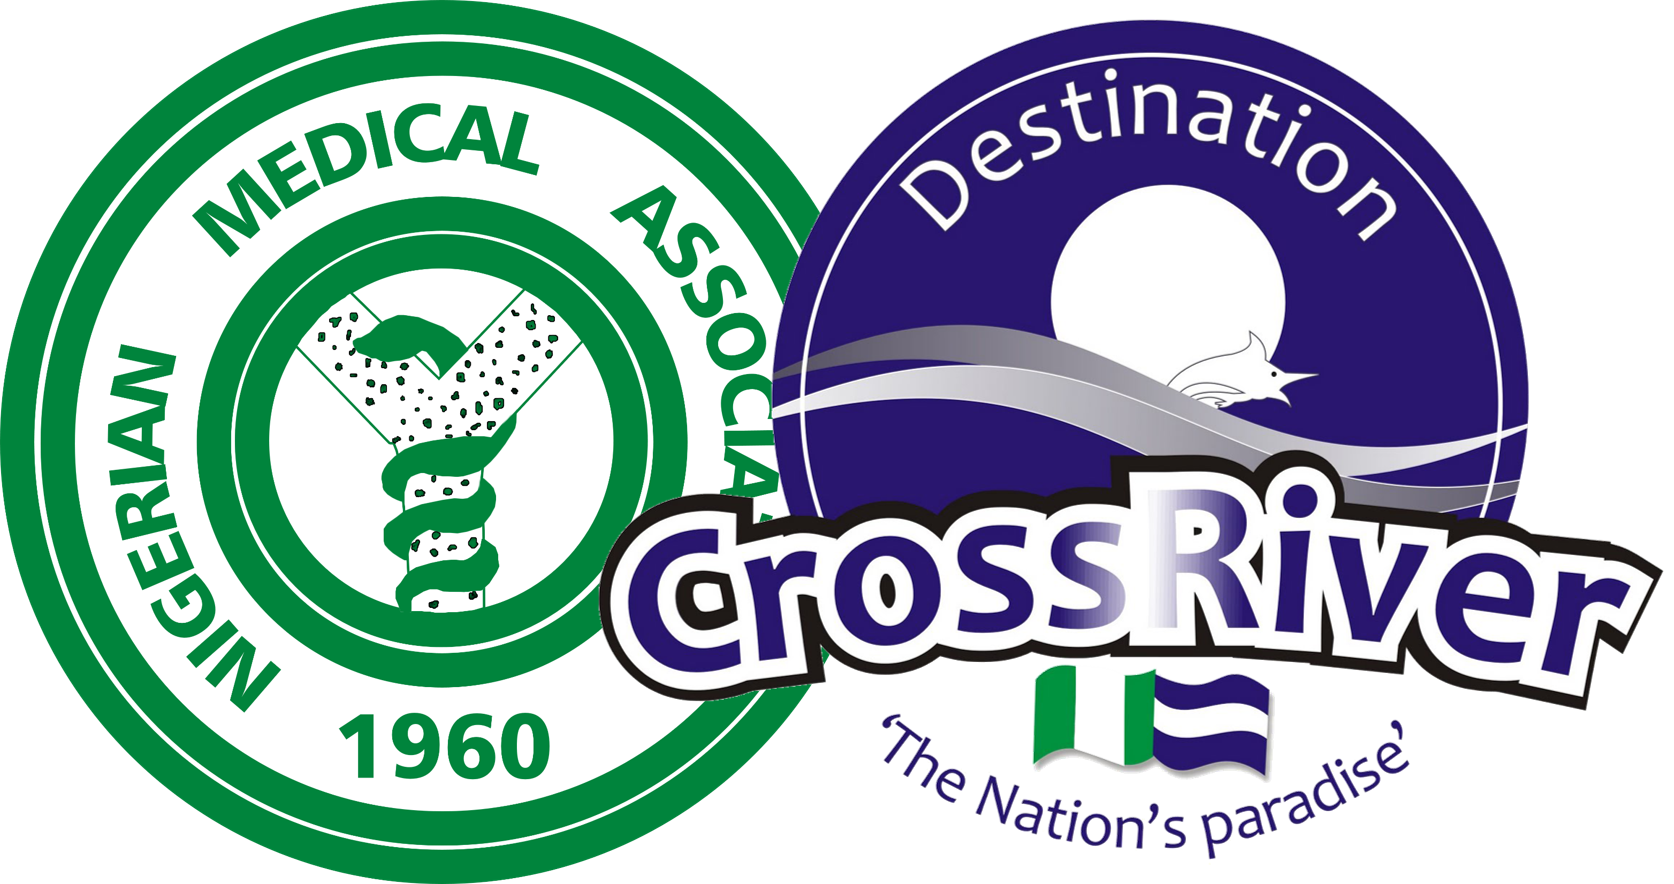 Nigerian Medical Association 57th Annual General Conference and